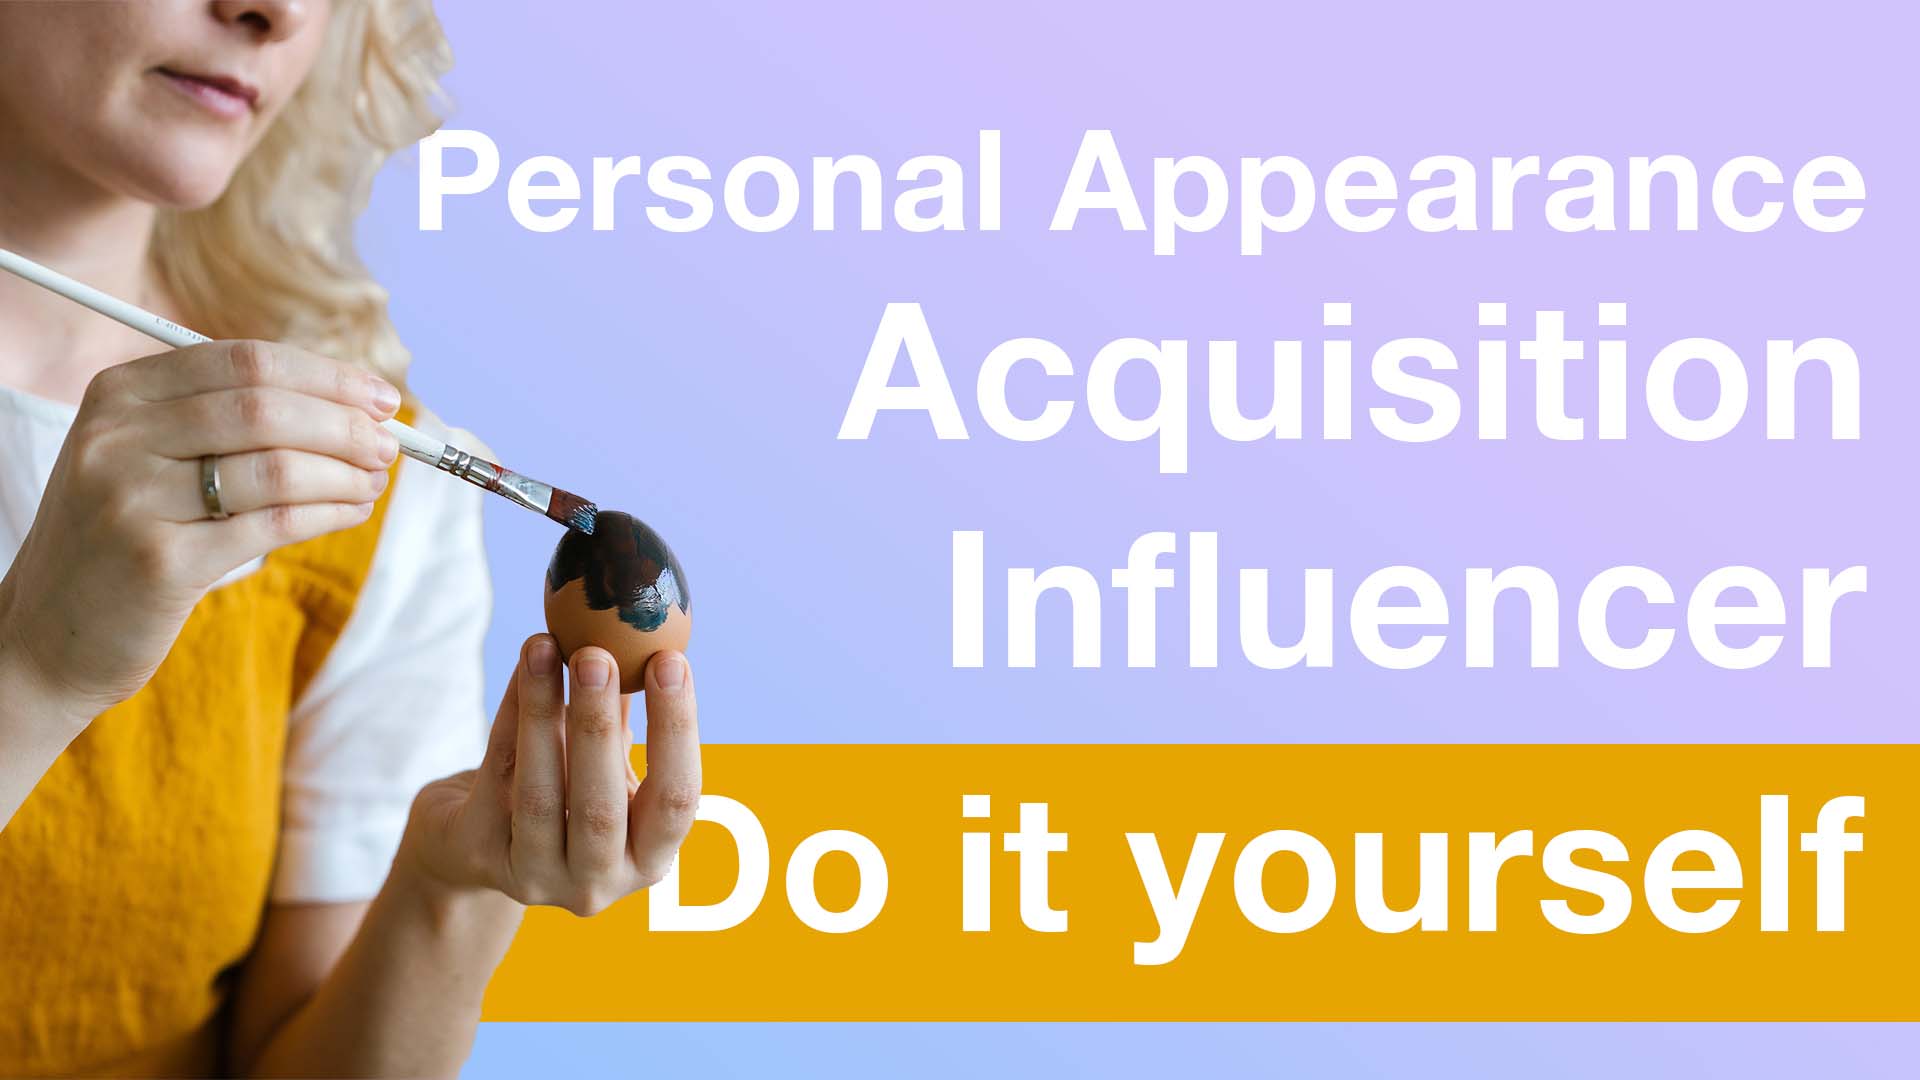 DIY (Do-it-yourself ) Influencer Marketing inkl. Personal Appearance